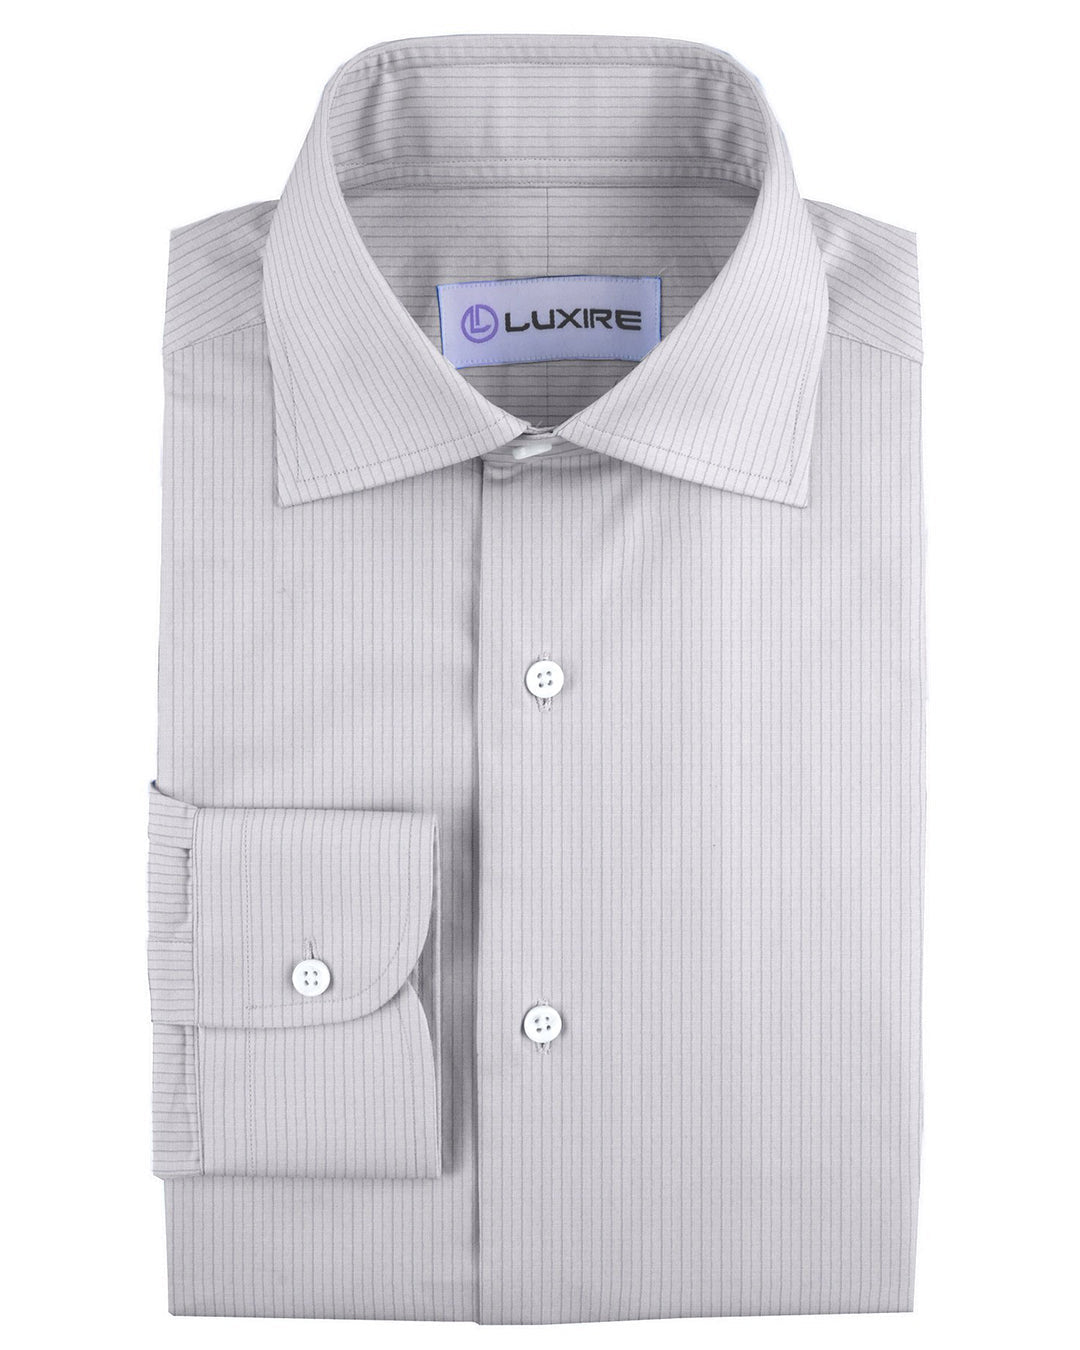 Front of the custom linen shirt for men in grey pinstripes by Luxire Clothing